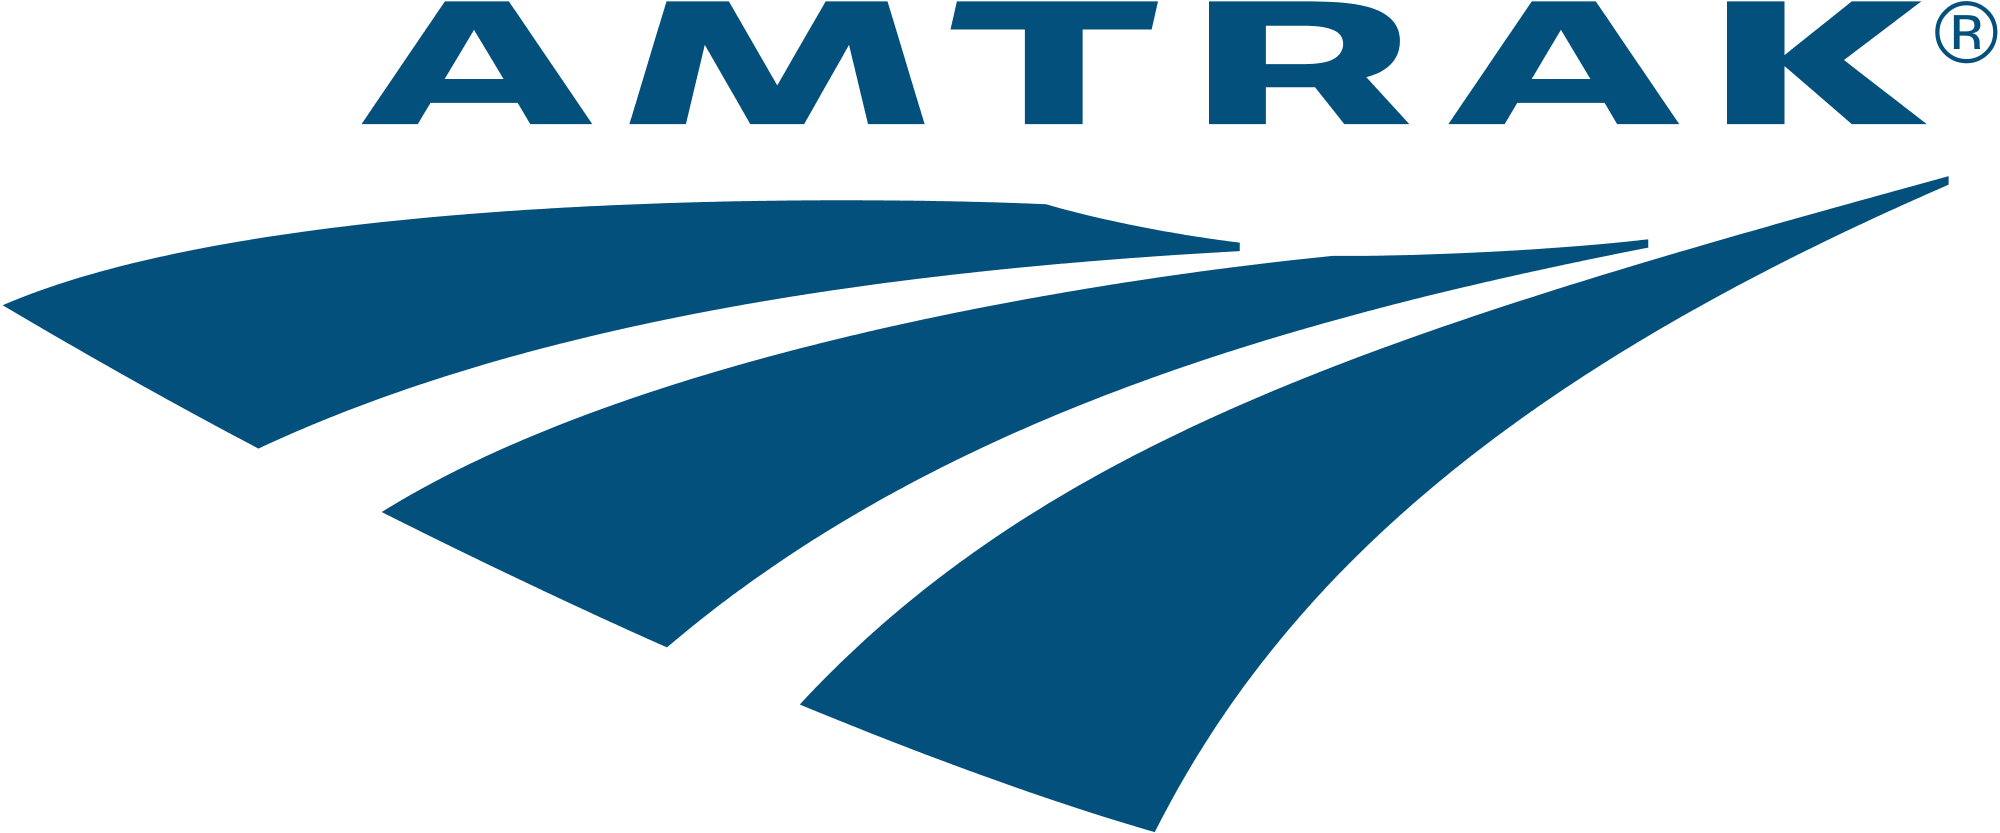 Amtrak logo on a black background, exemplifying integrated marketing solutions.